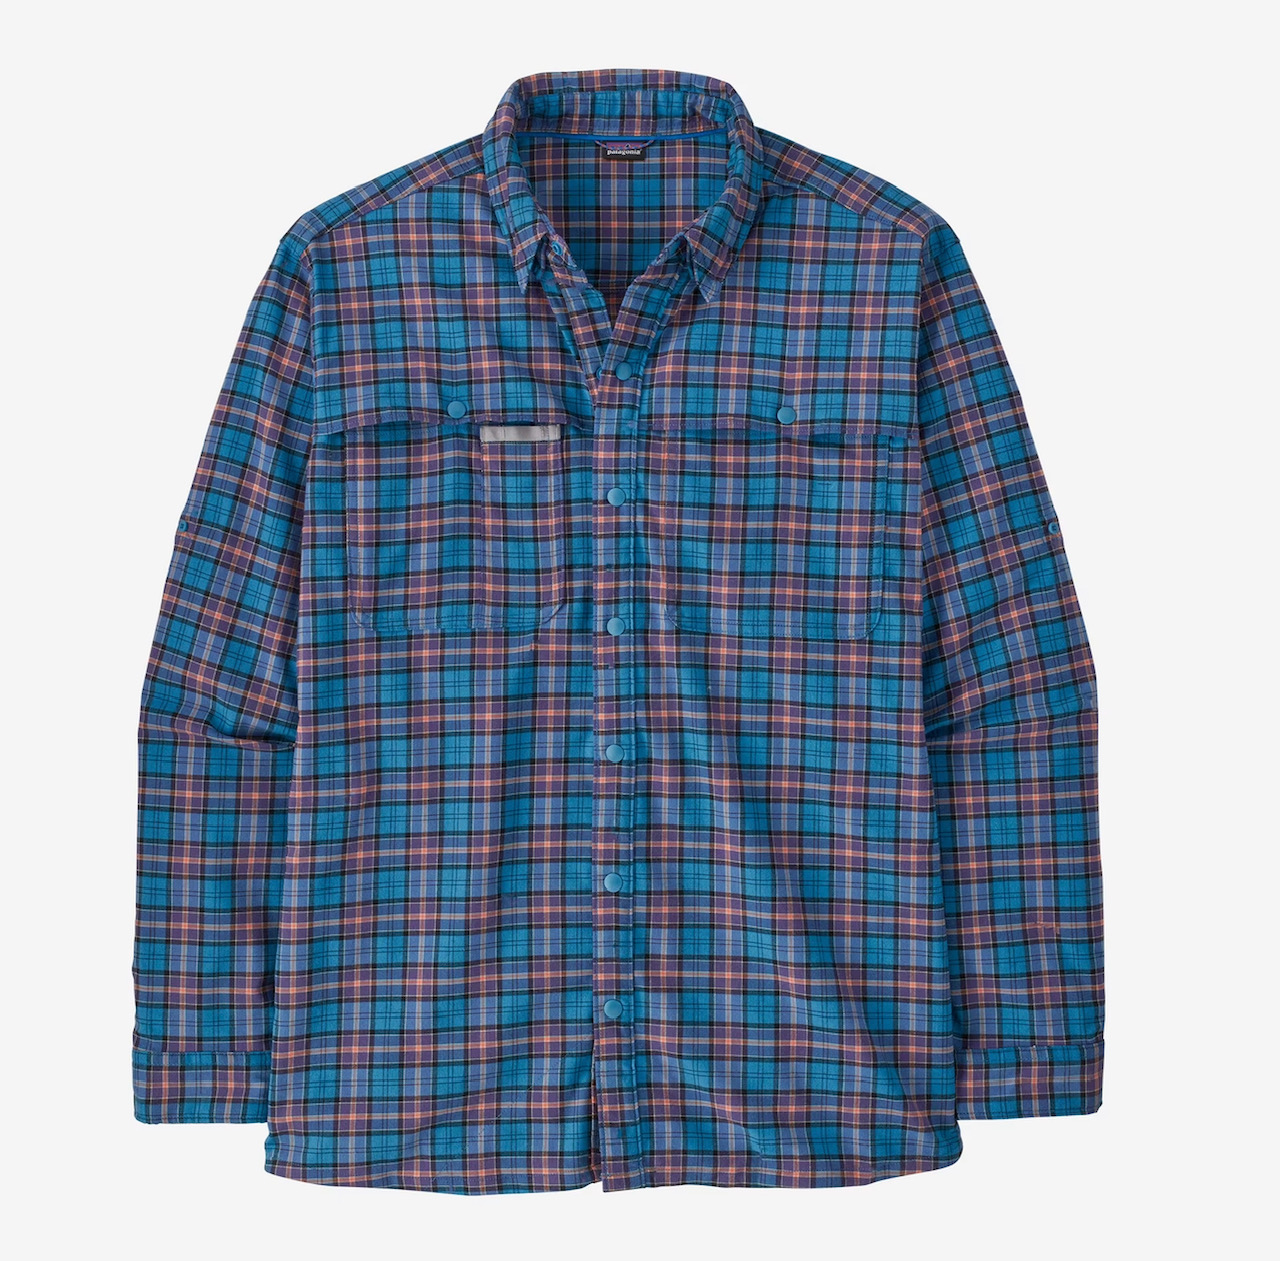 Patagonia M's Early Rise Stretch Shirt - On the Fly: Anacapa Blue - Medium